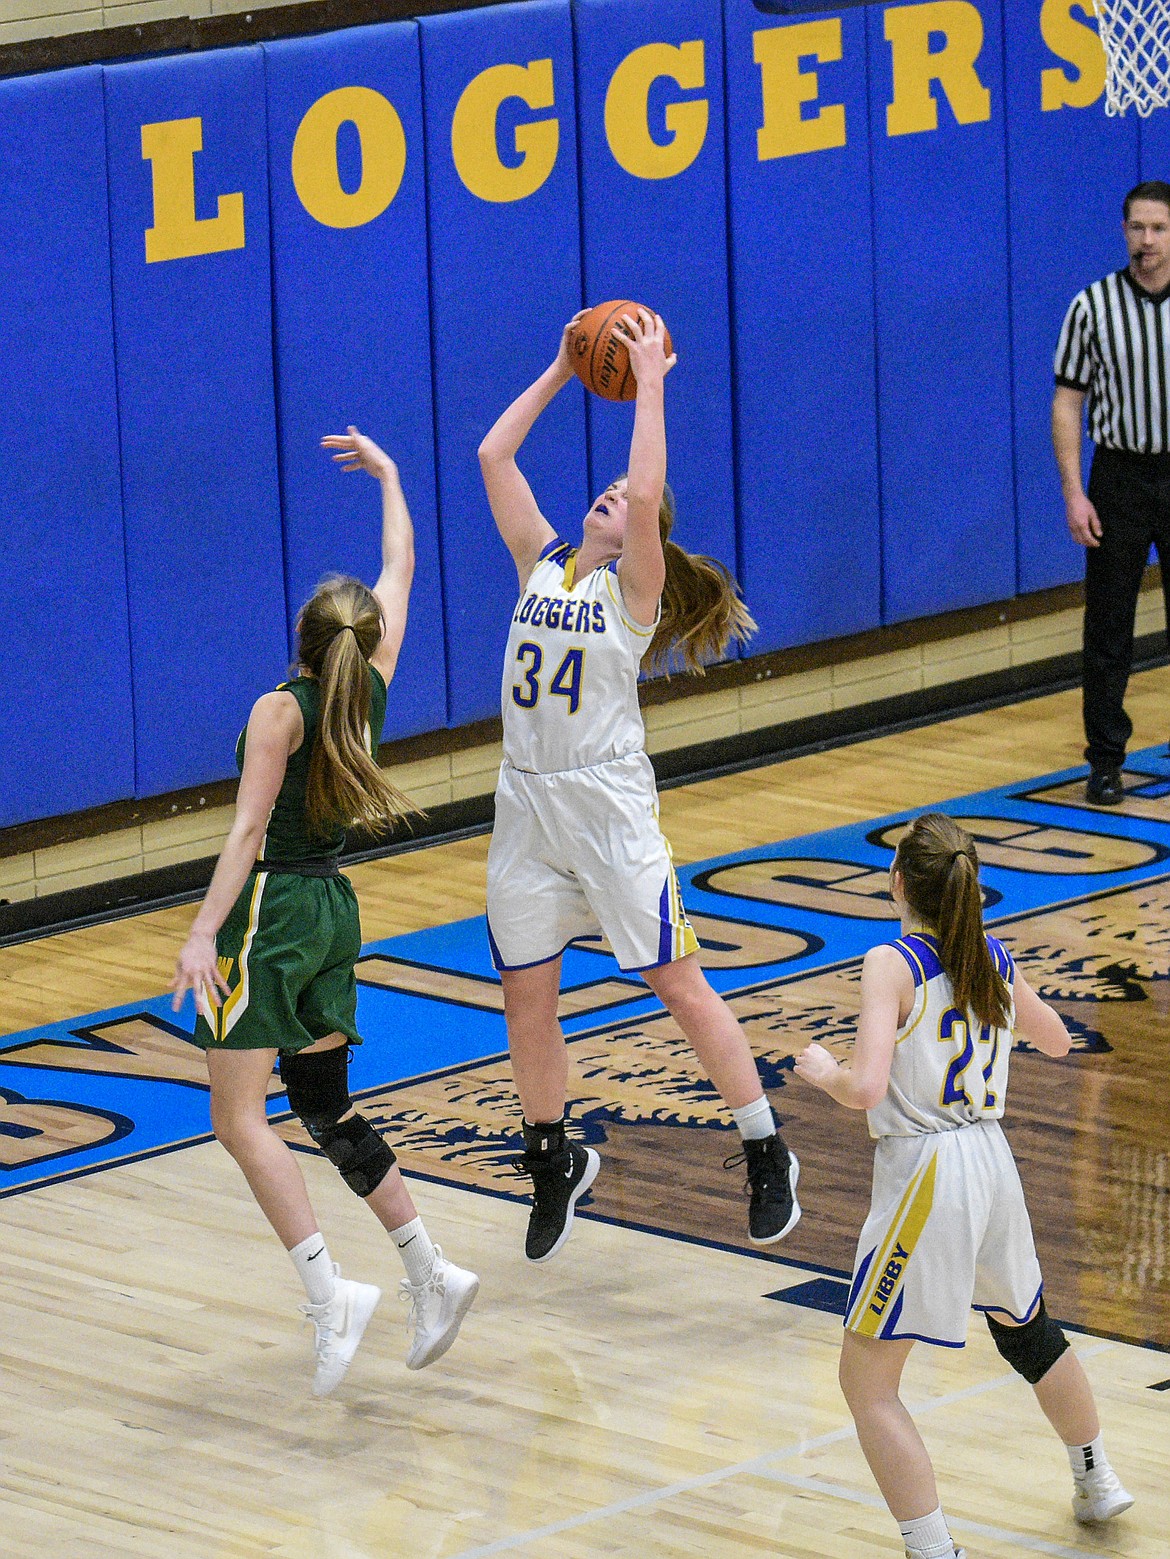 Libby junior McKenzie Proffitt gets a steal off a pass to Whitefish senior Kit Anderson late in the first quarter Saturday. (Ben Kibbey/The Western News)